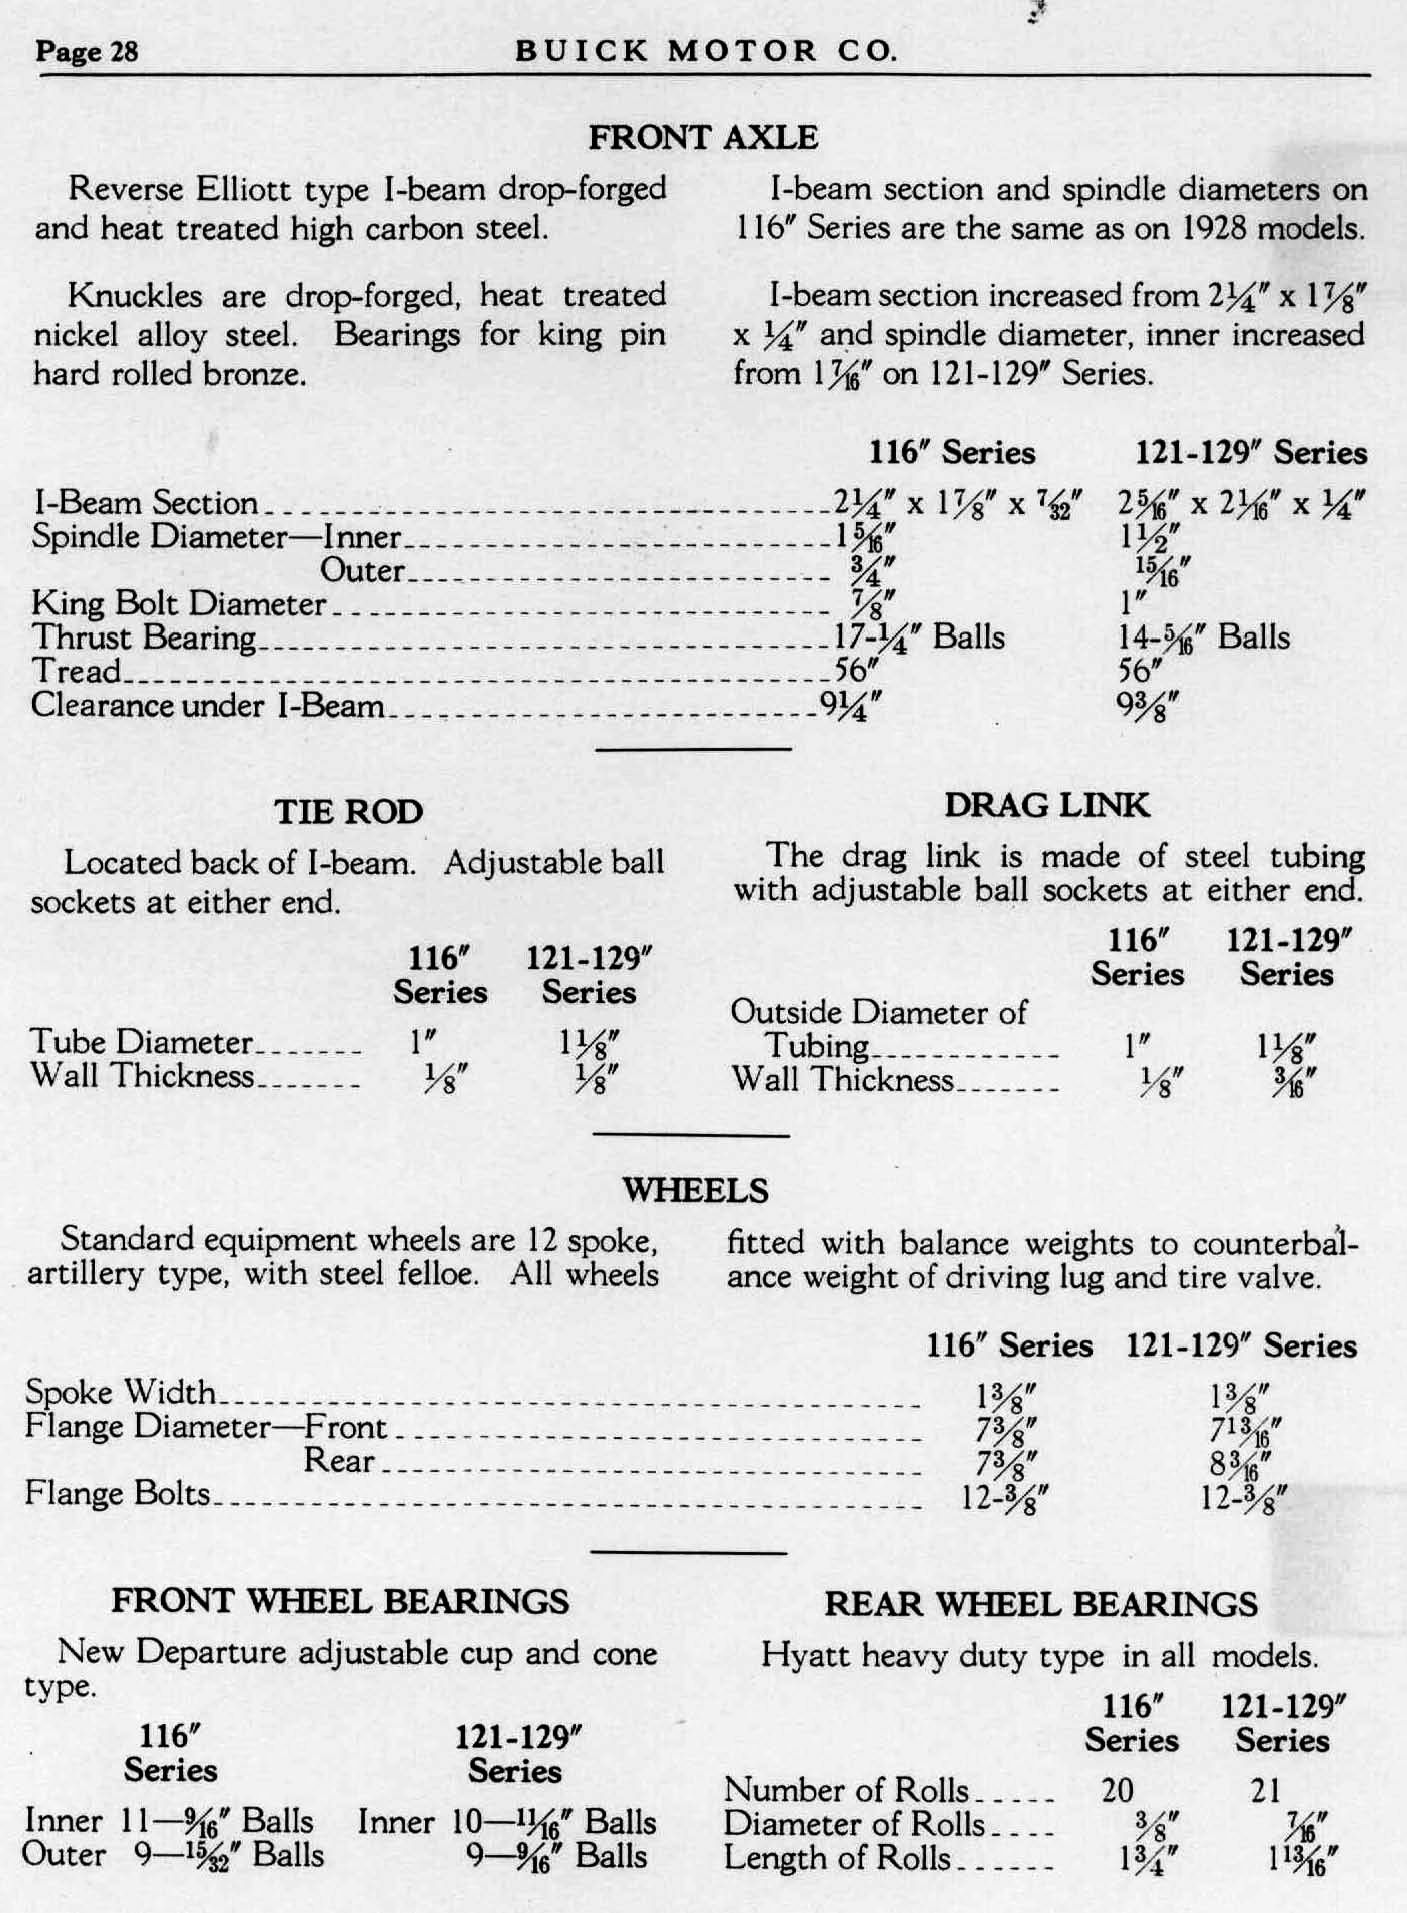 1929 Buick Detailed Specs-28